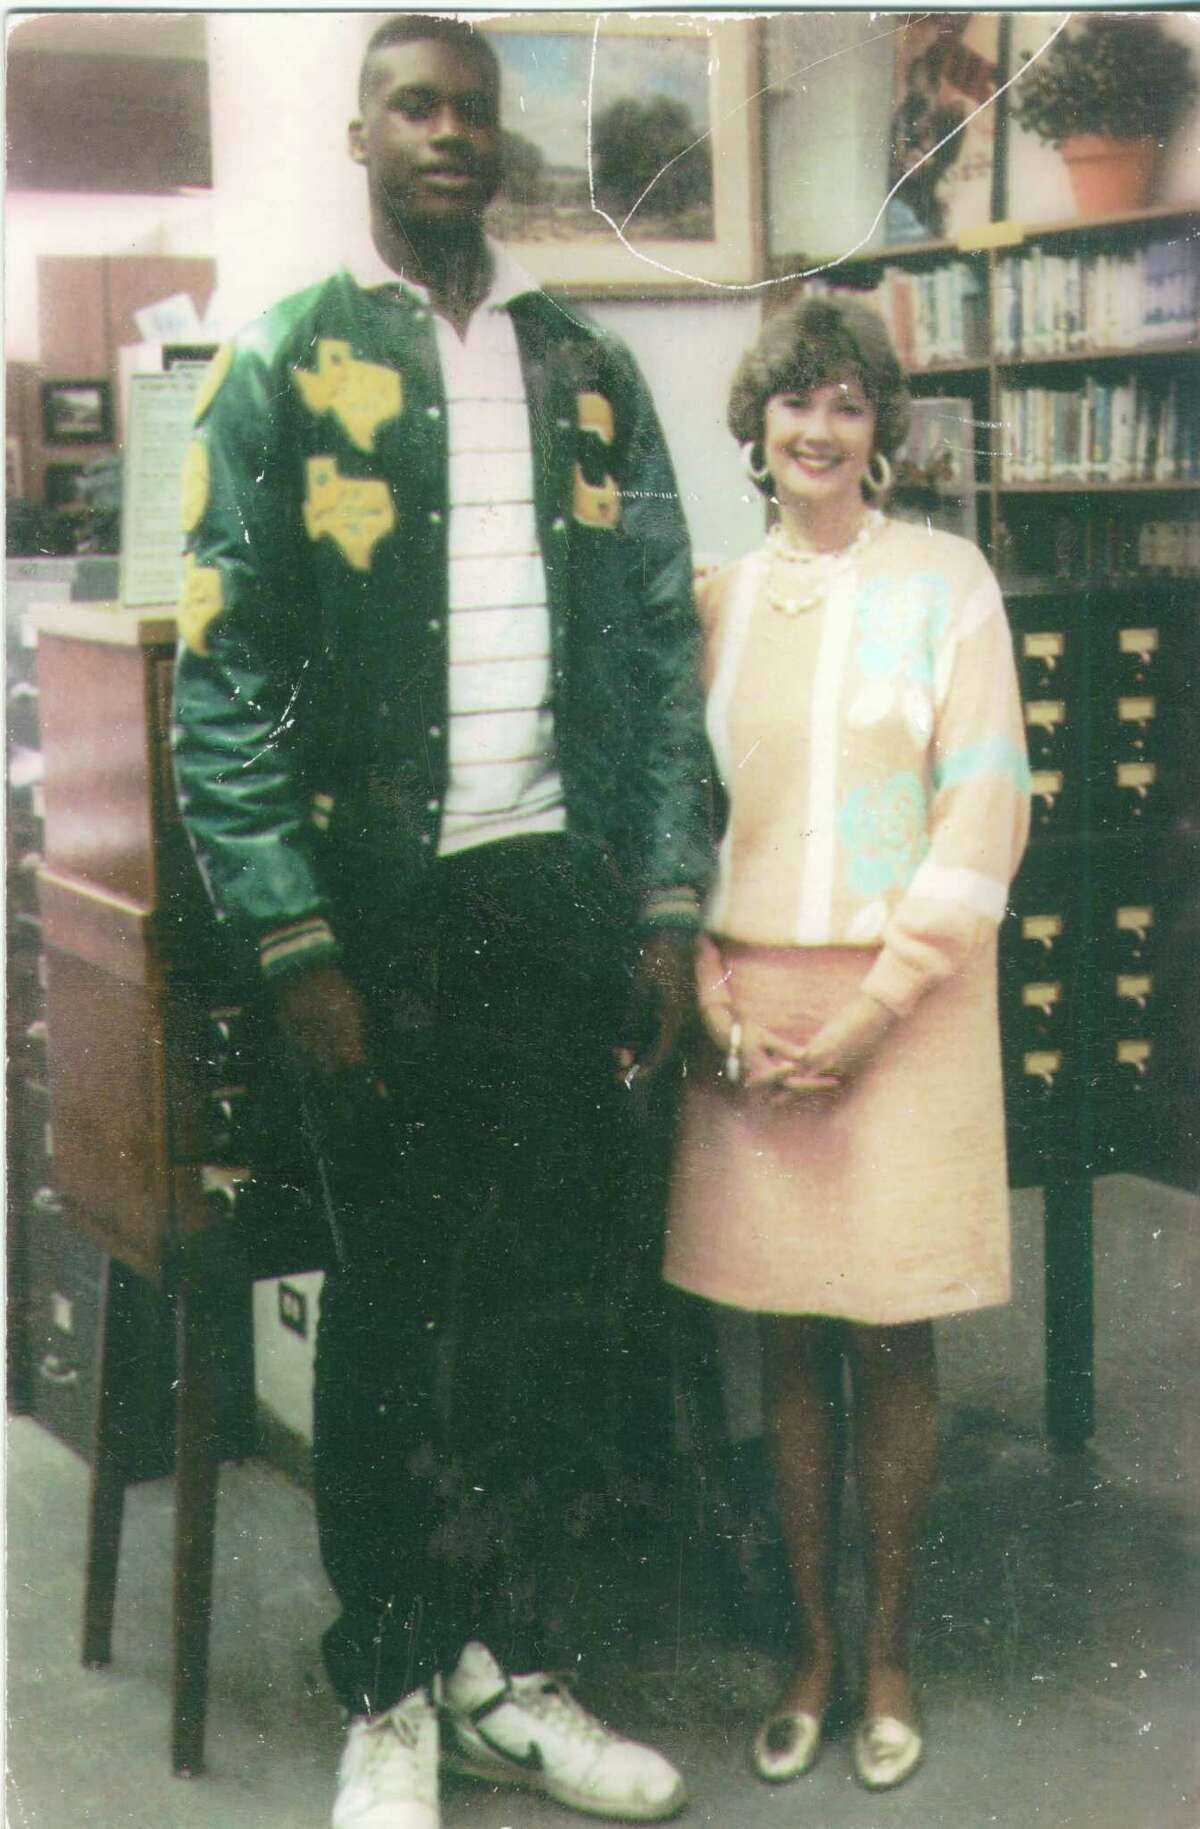 In 1989, shortly after the Cole High School boys basketball team posted a 36-0 record and won the 3A state championship, Shaquille ONeal posed with librarian Sandee Mewhinney.” I knew Shaquille would go far in his basketball career,” she writes, “so I wanted a picture with him.”